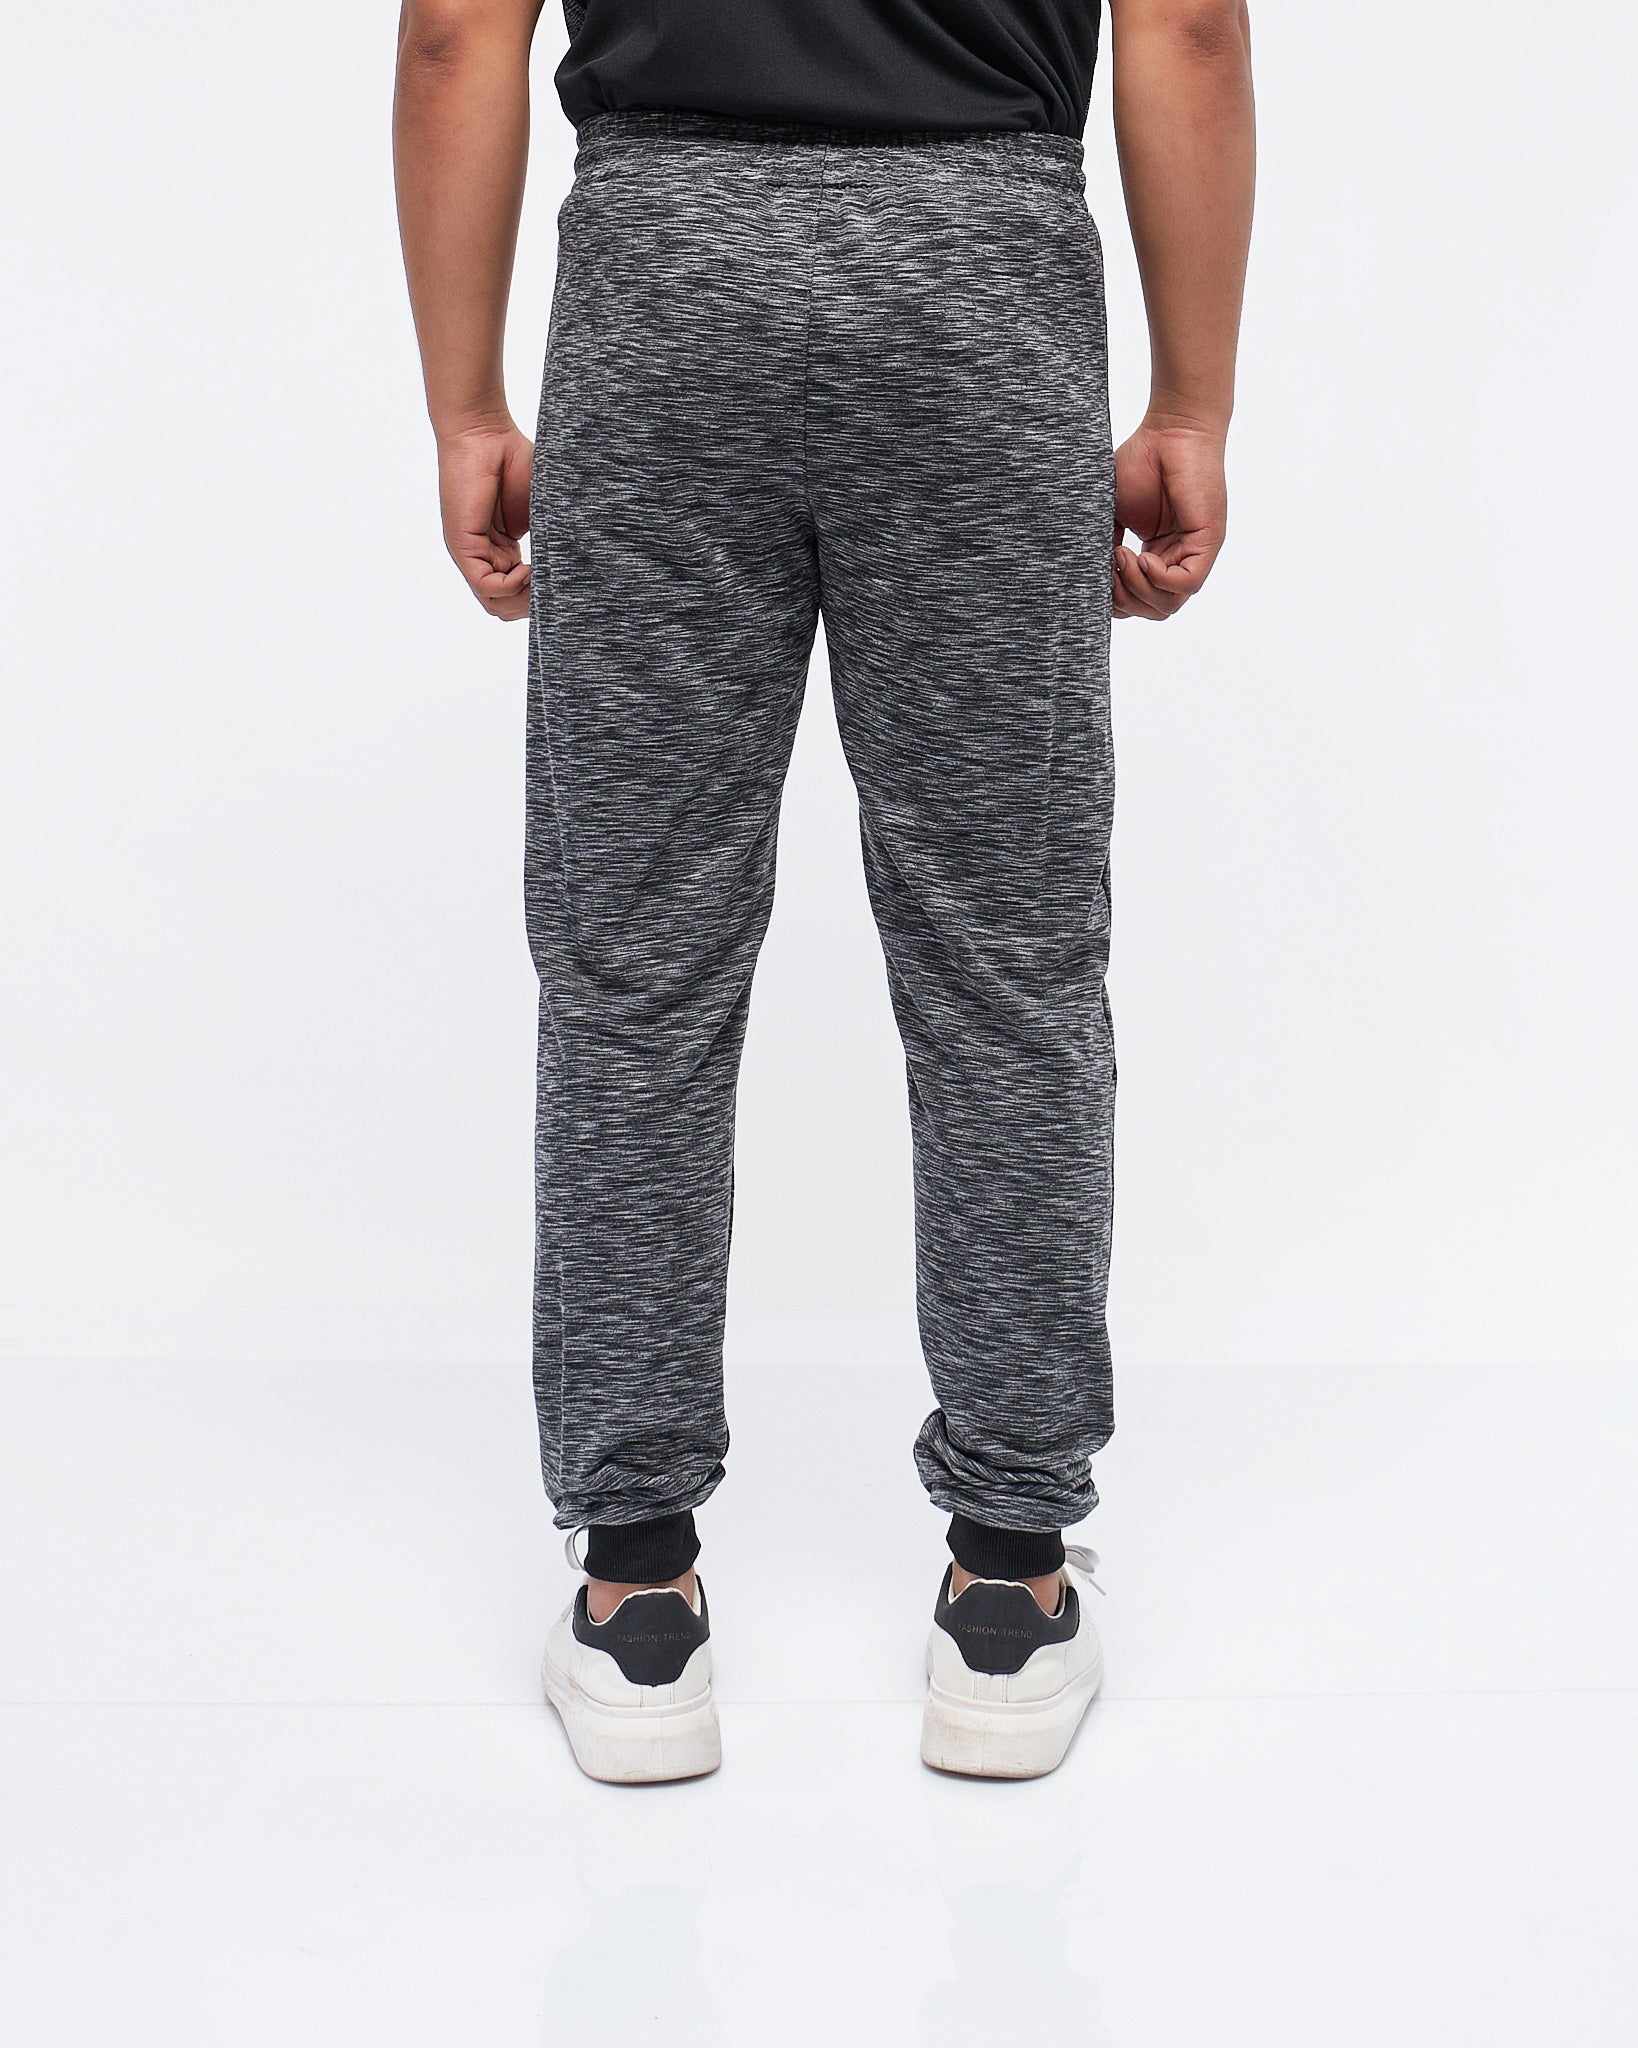 MOI OUTFIT-Left Logo Printed Men Joggers 17.90